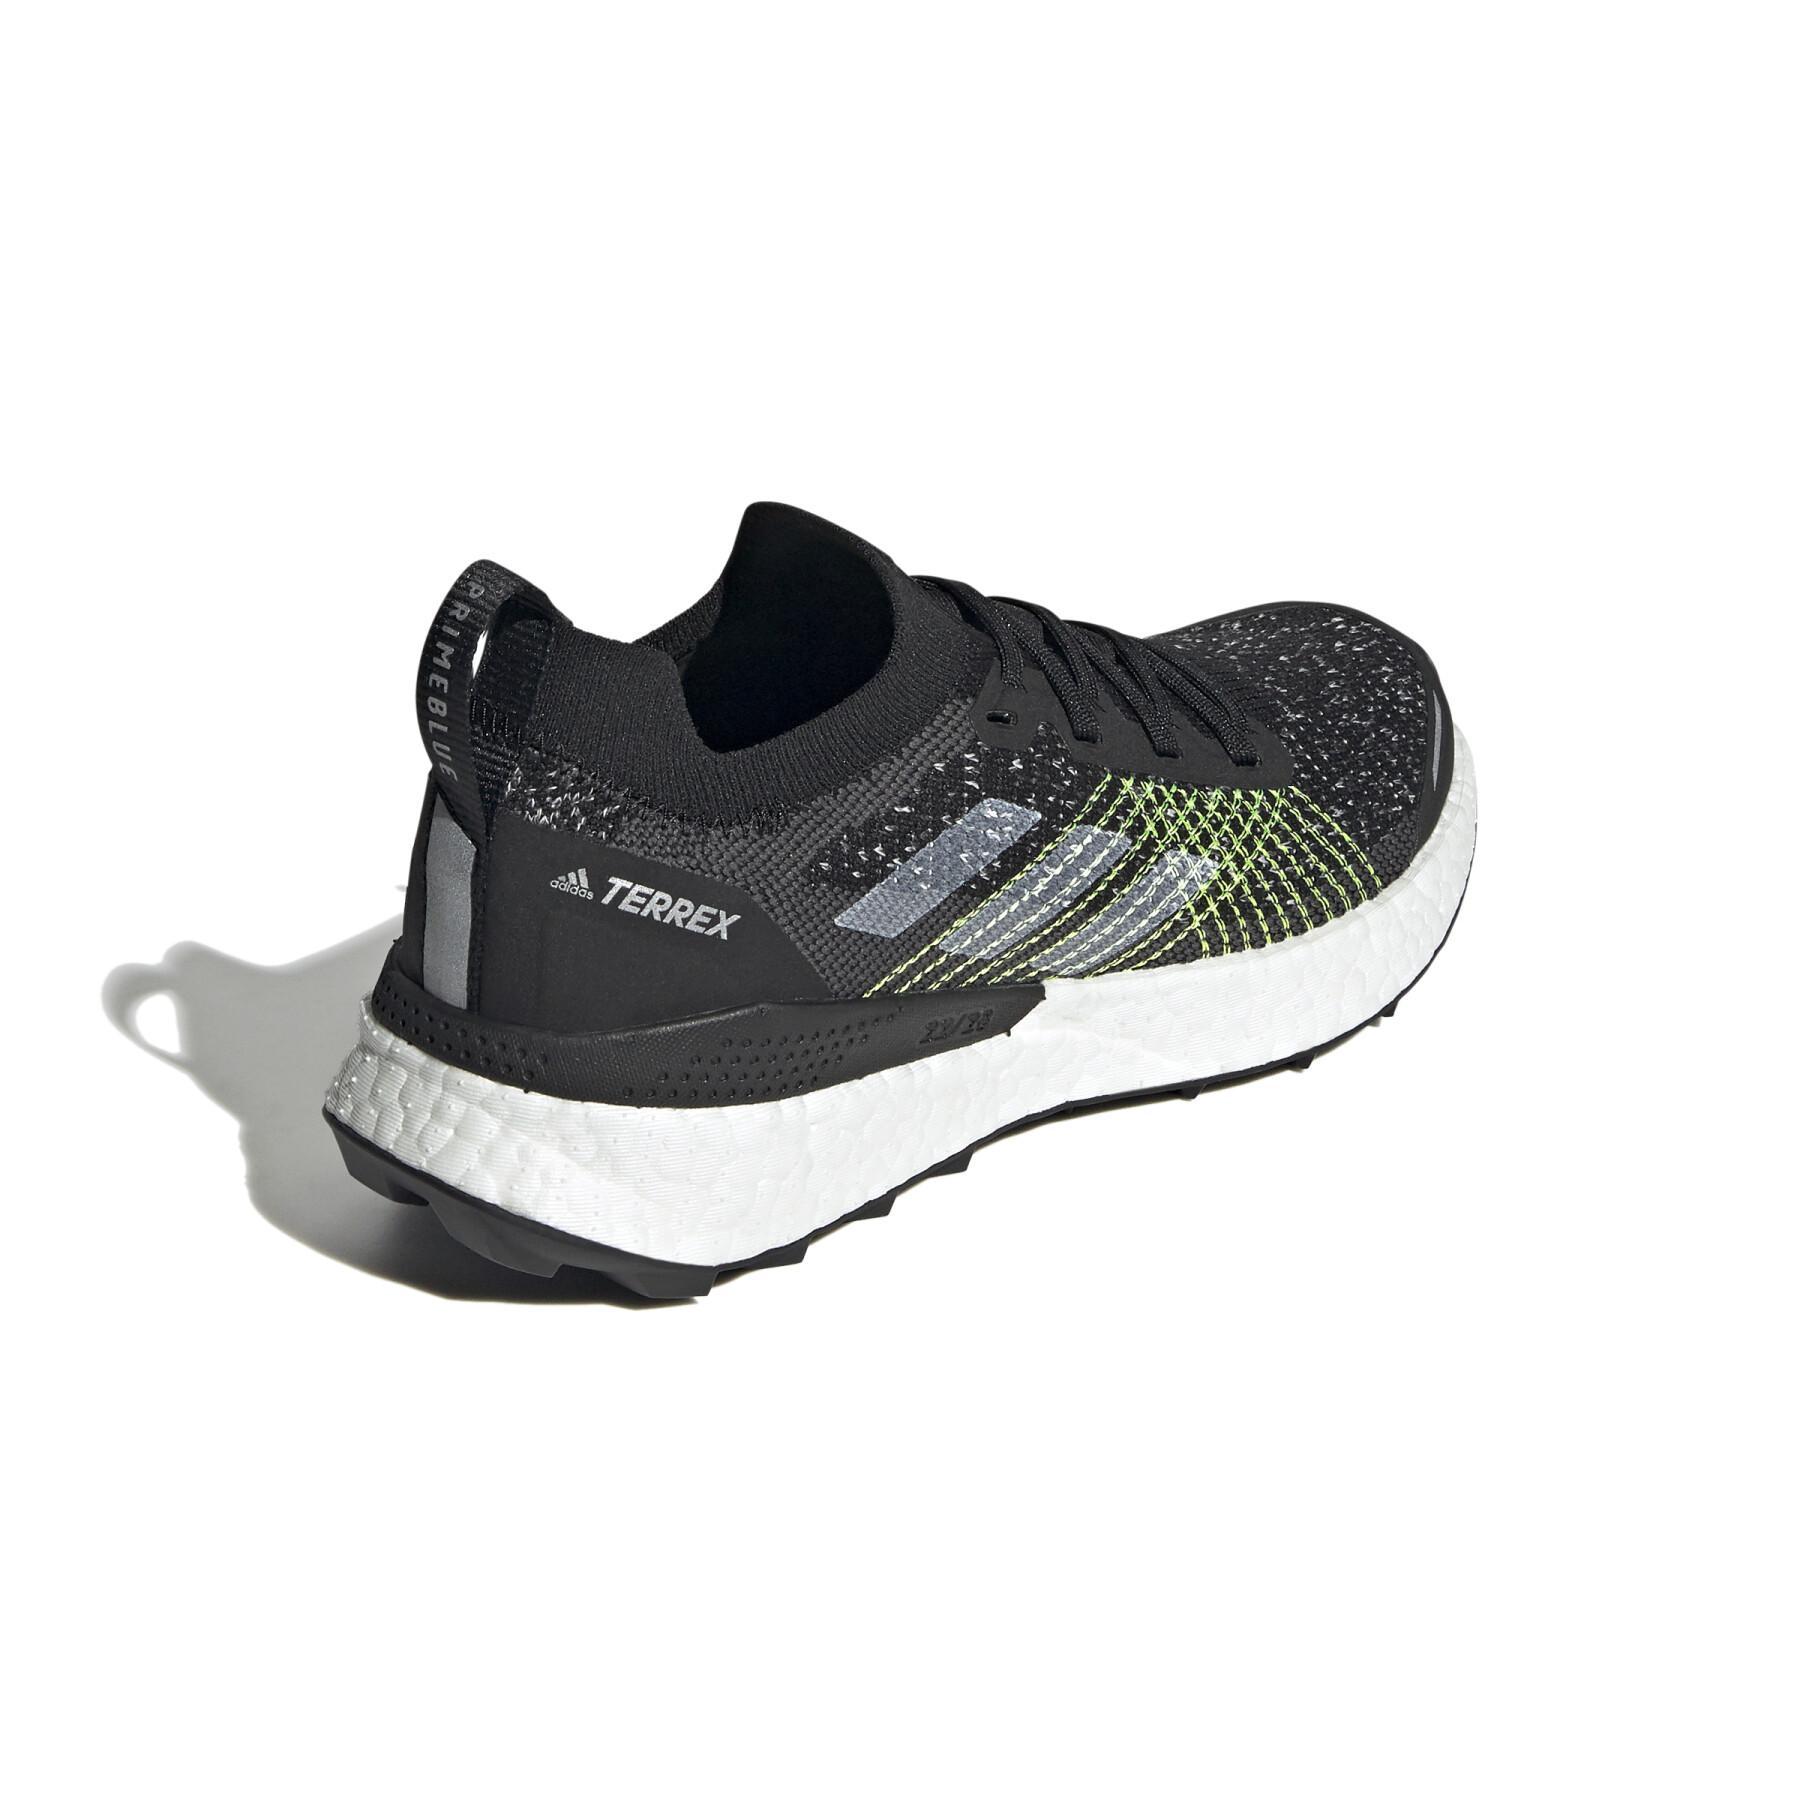 Women's Trail running shoes adidas Terrex Two Ultra Parley